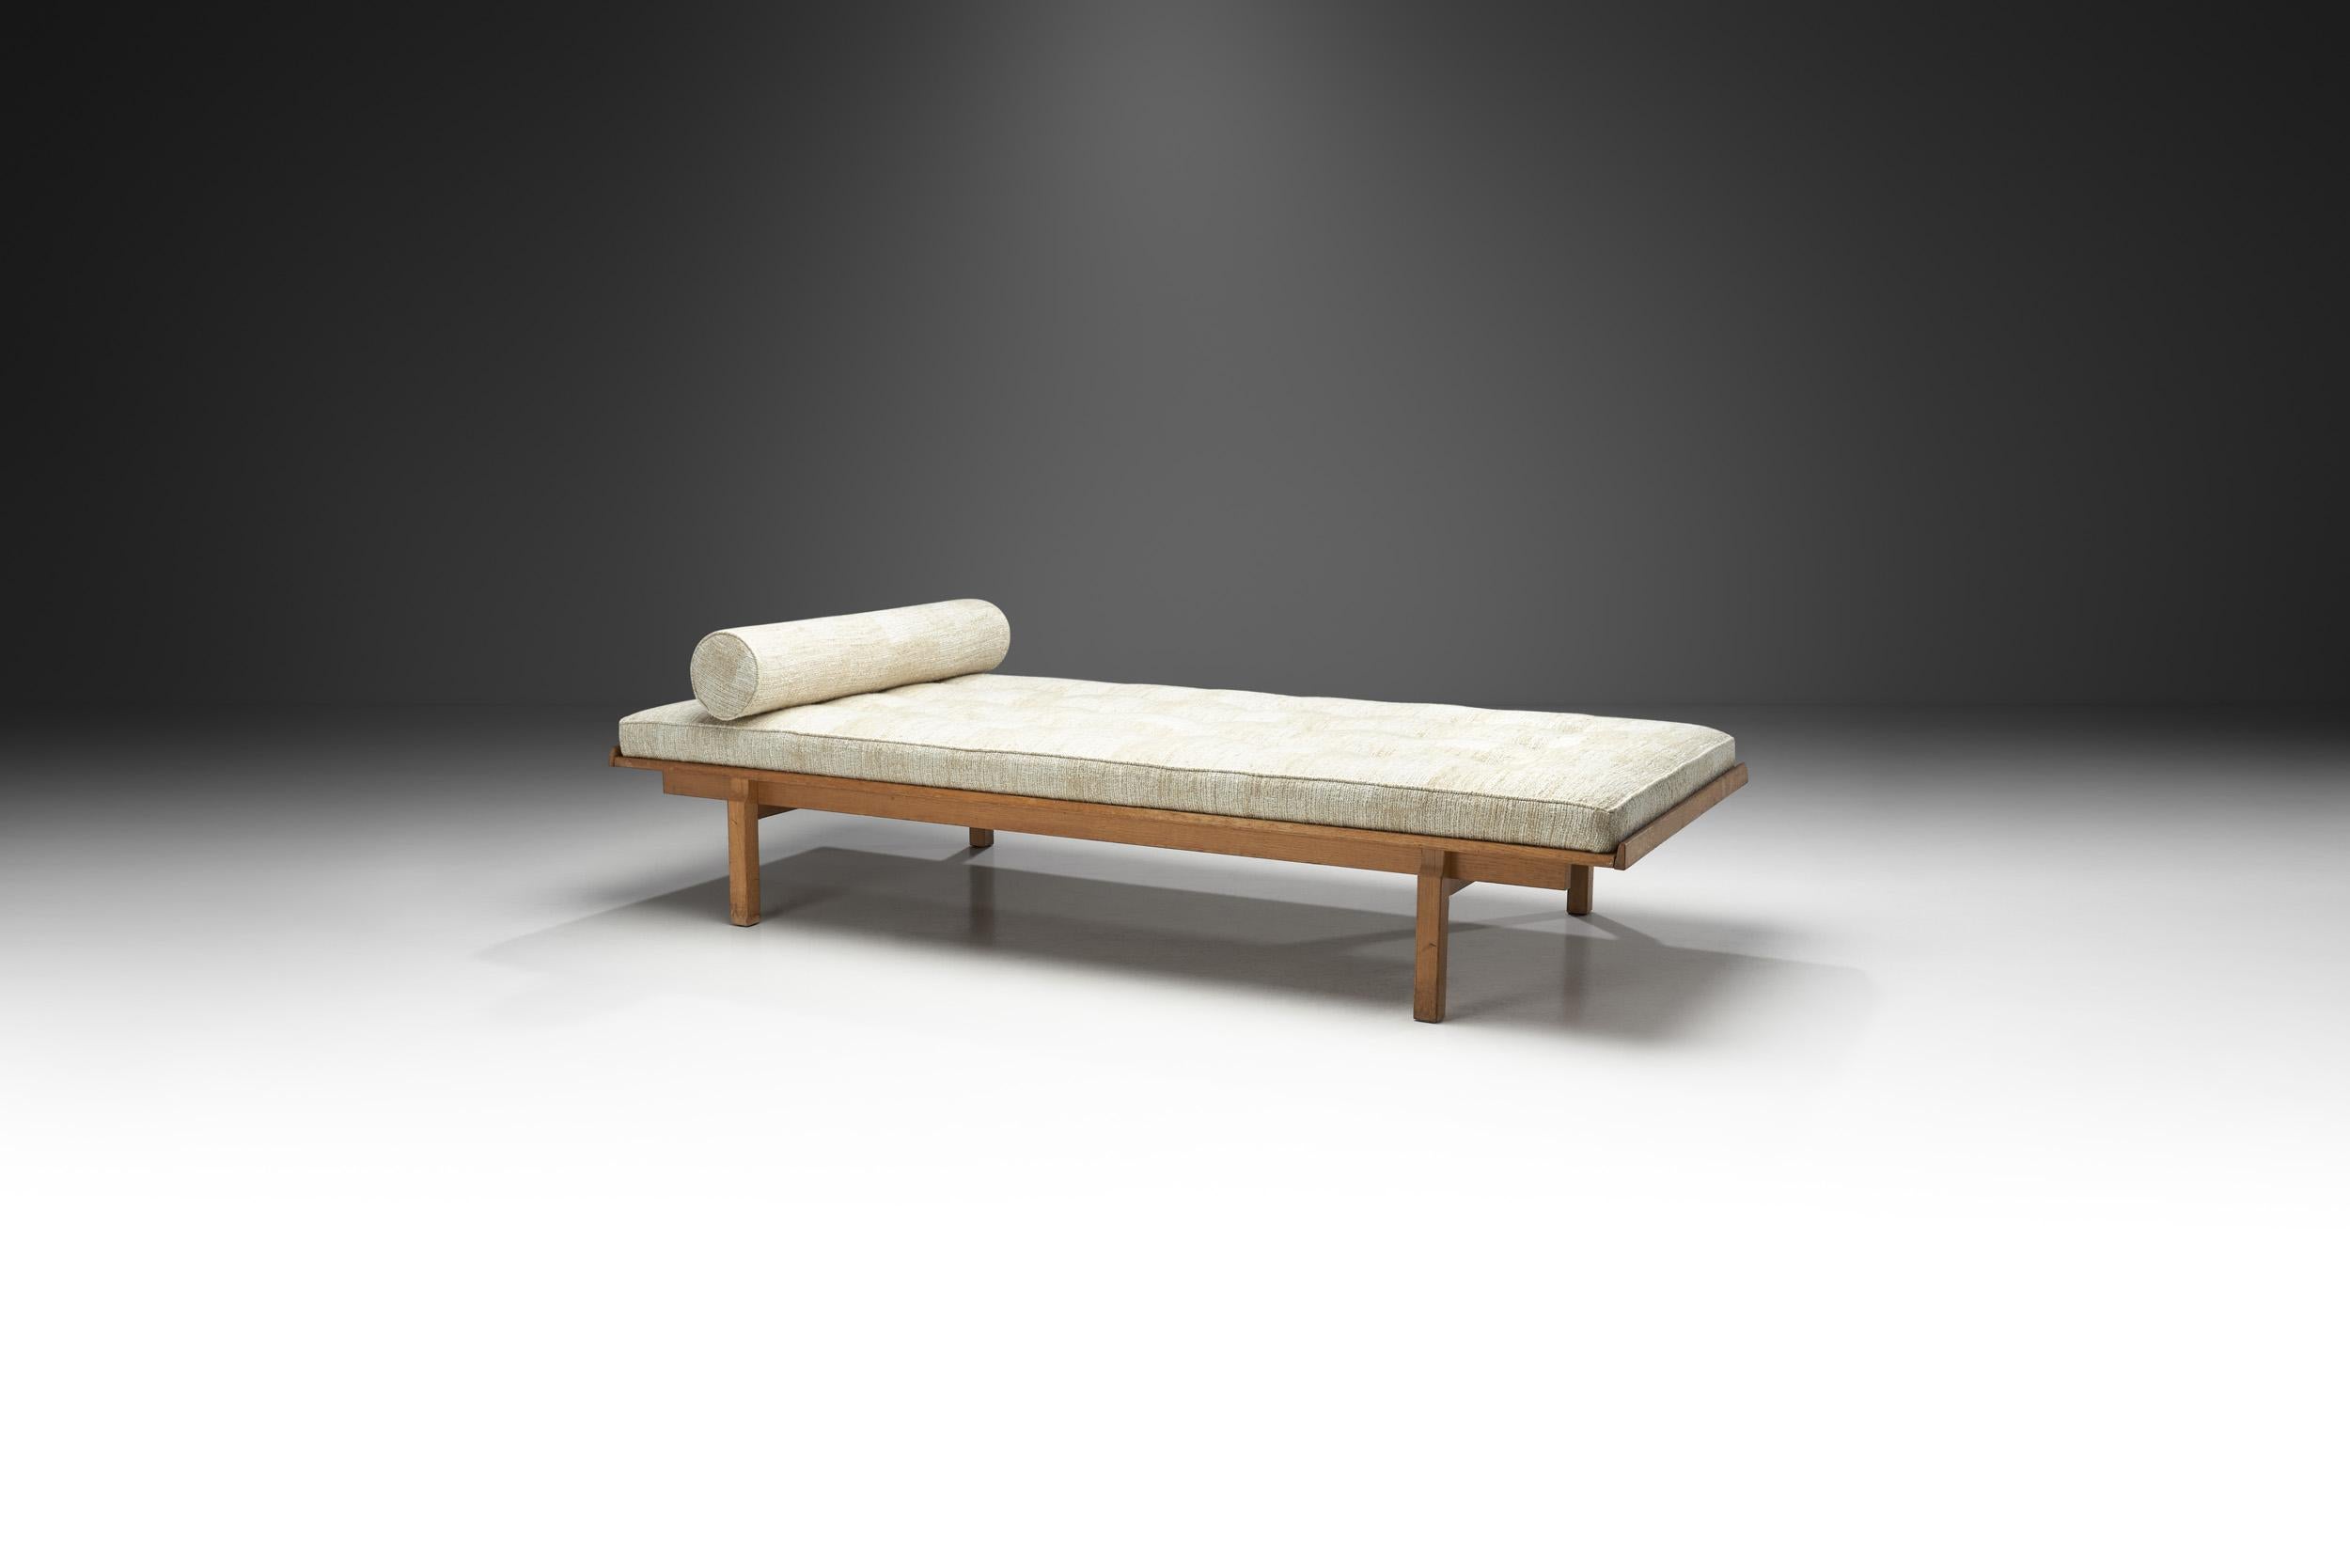 This gorgeous daybed with oak legs was inspired by classic Danish furniture design and simplicity. ‘Danish Modern’ is a recognized term around the world, standing for the characteristic style of Danish design created during the 20th century. Pieces